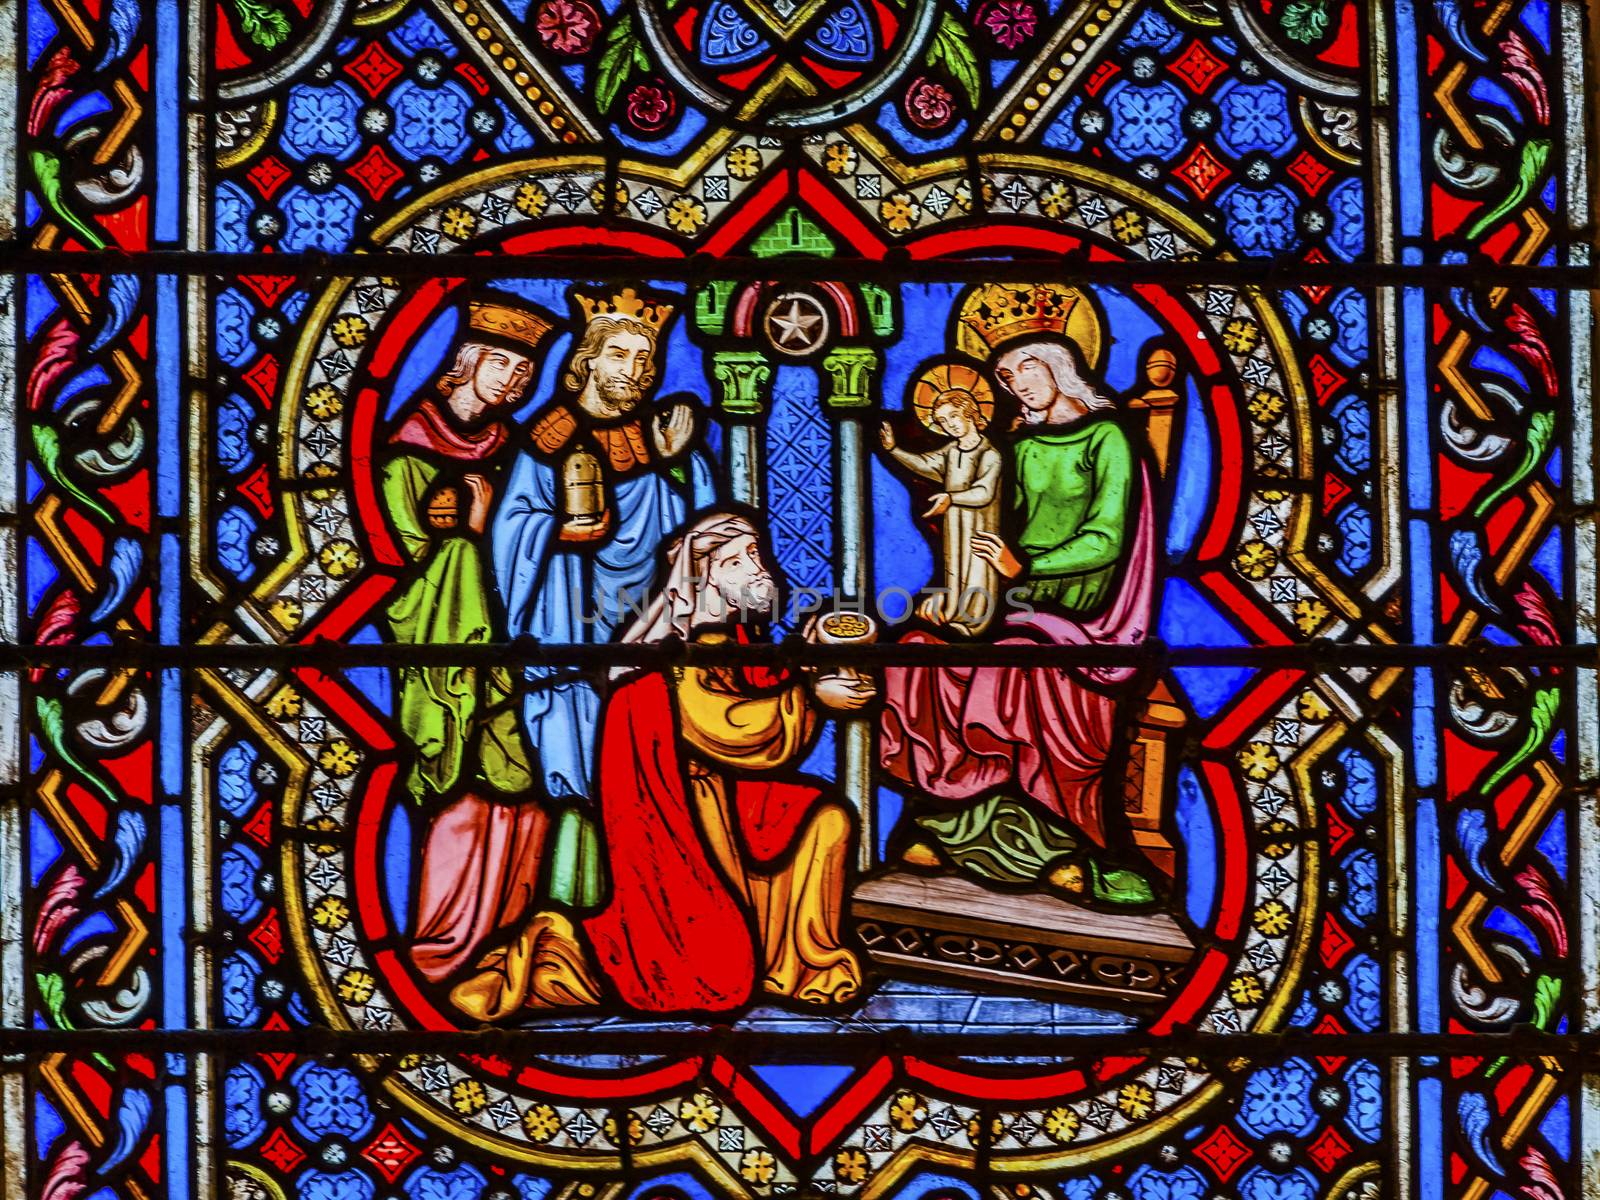 Three Kings Mary Jesus Christ Stained Glass Notre Dame Cathedral Paris France.  Notre Dame was built between 1163 and 1250AD.  